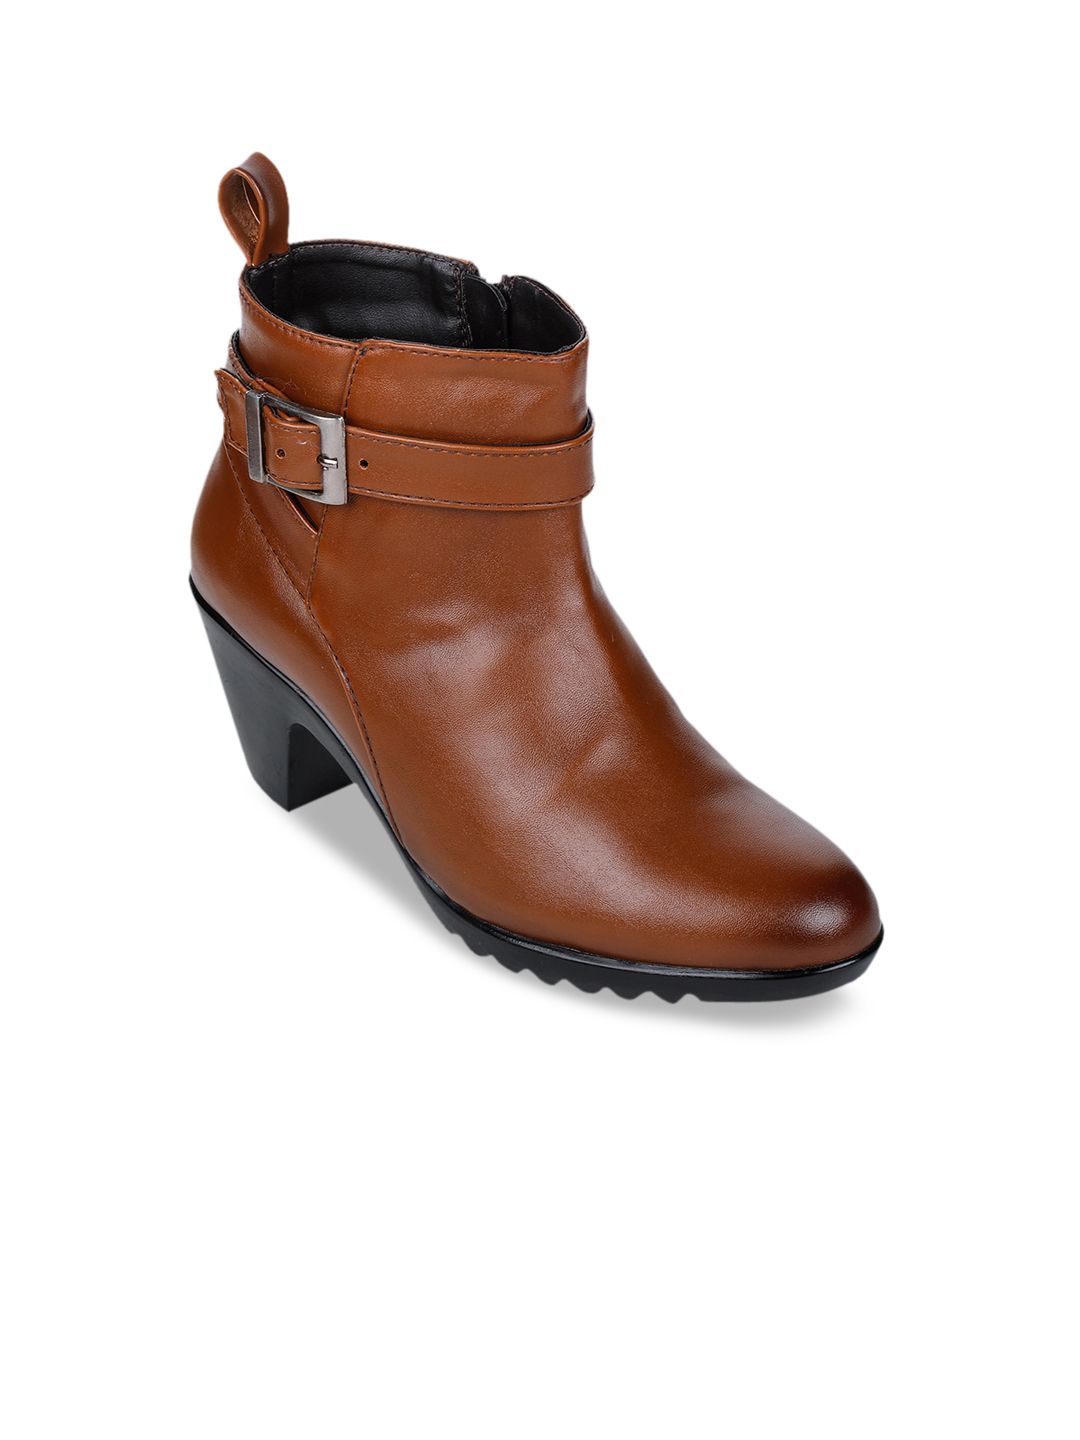 Bruno Manetti Women Tan Solid Heeled Boots Price in India